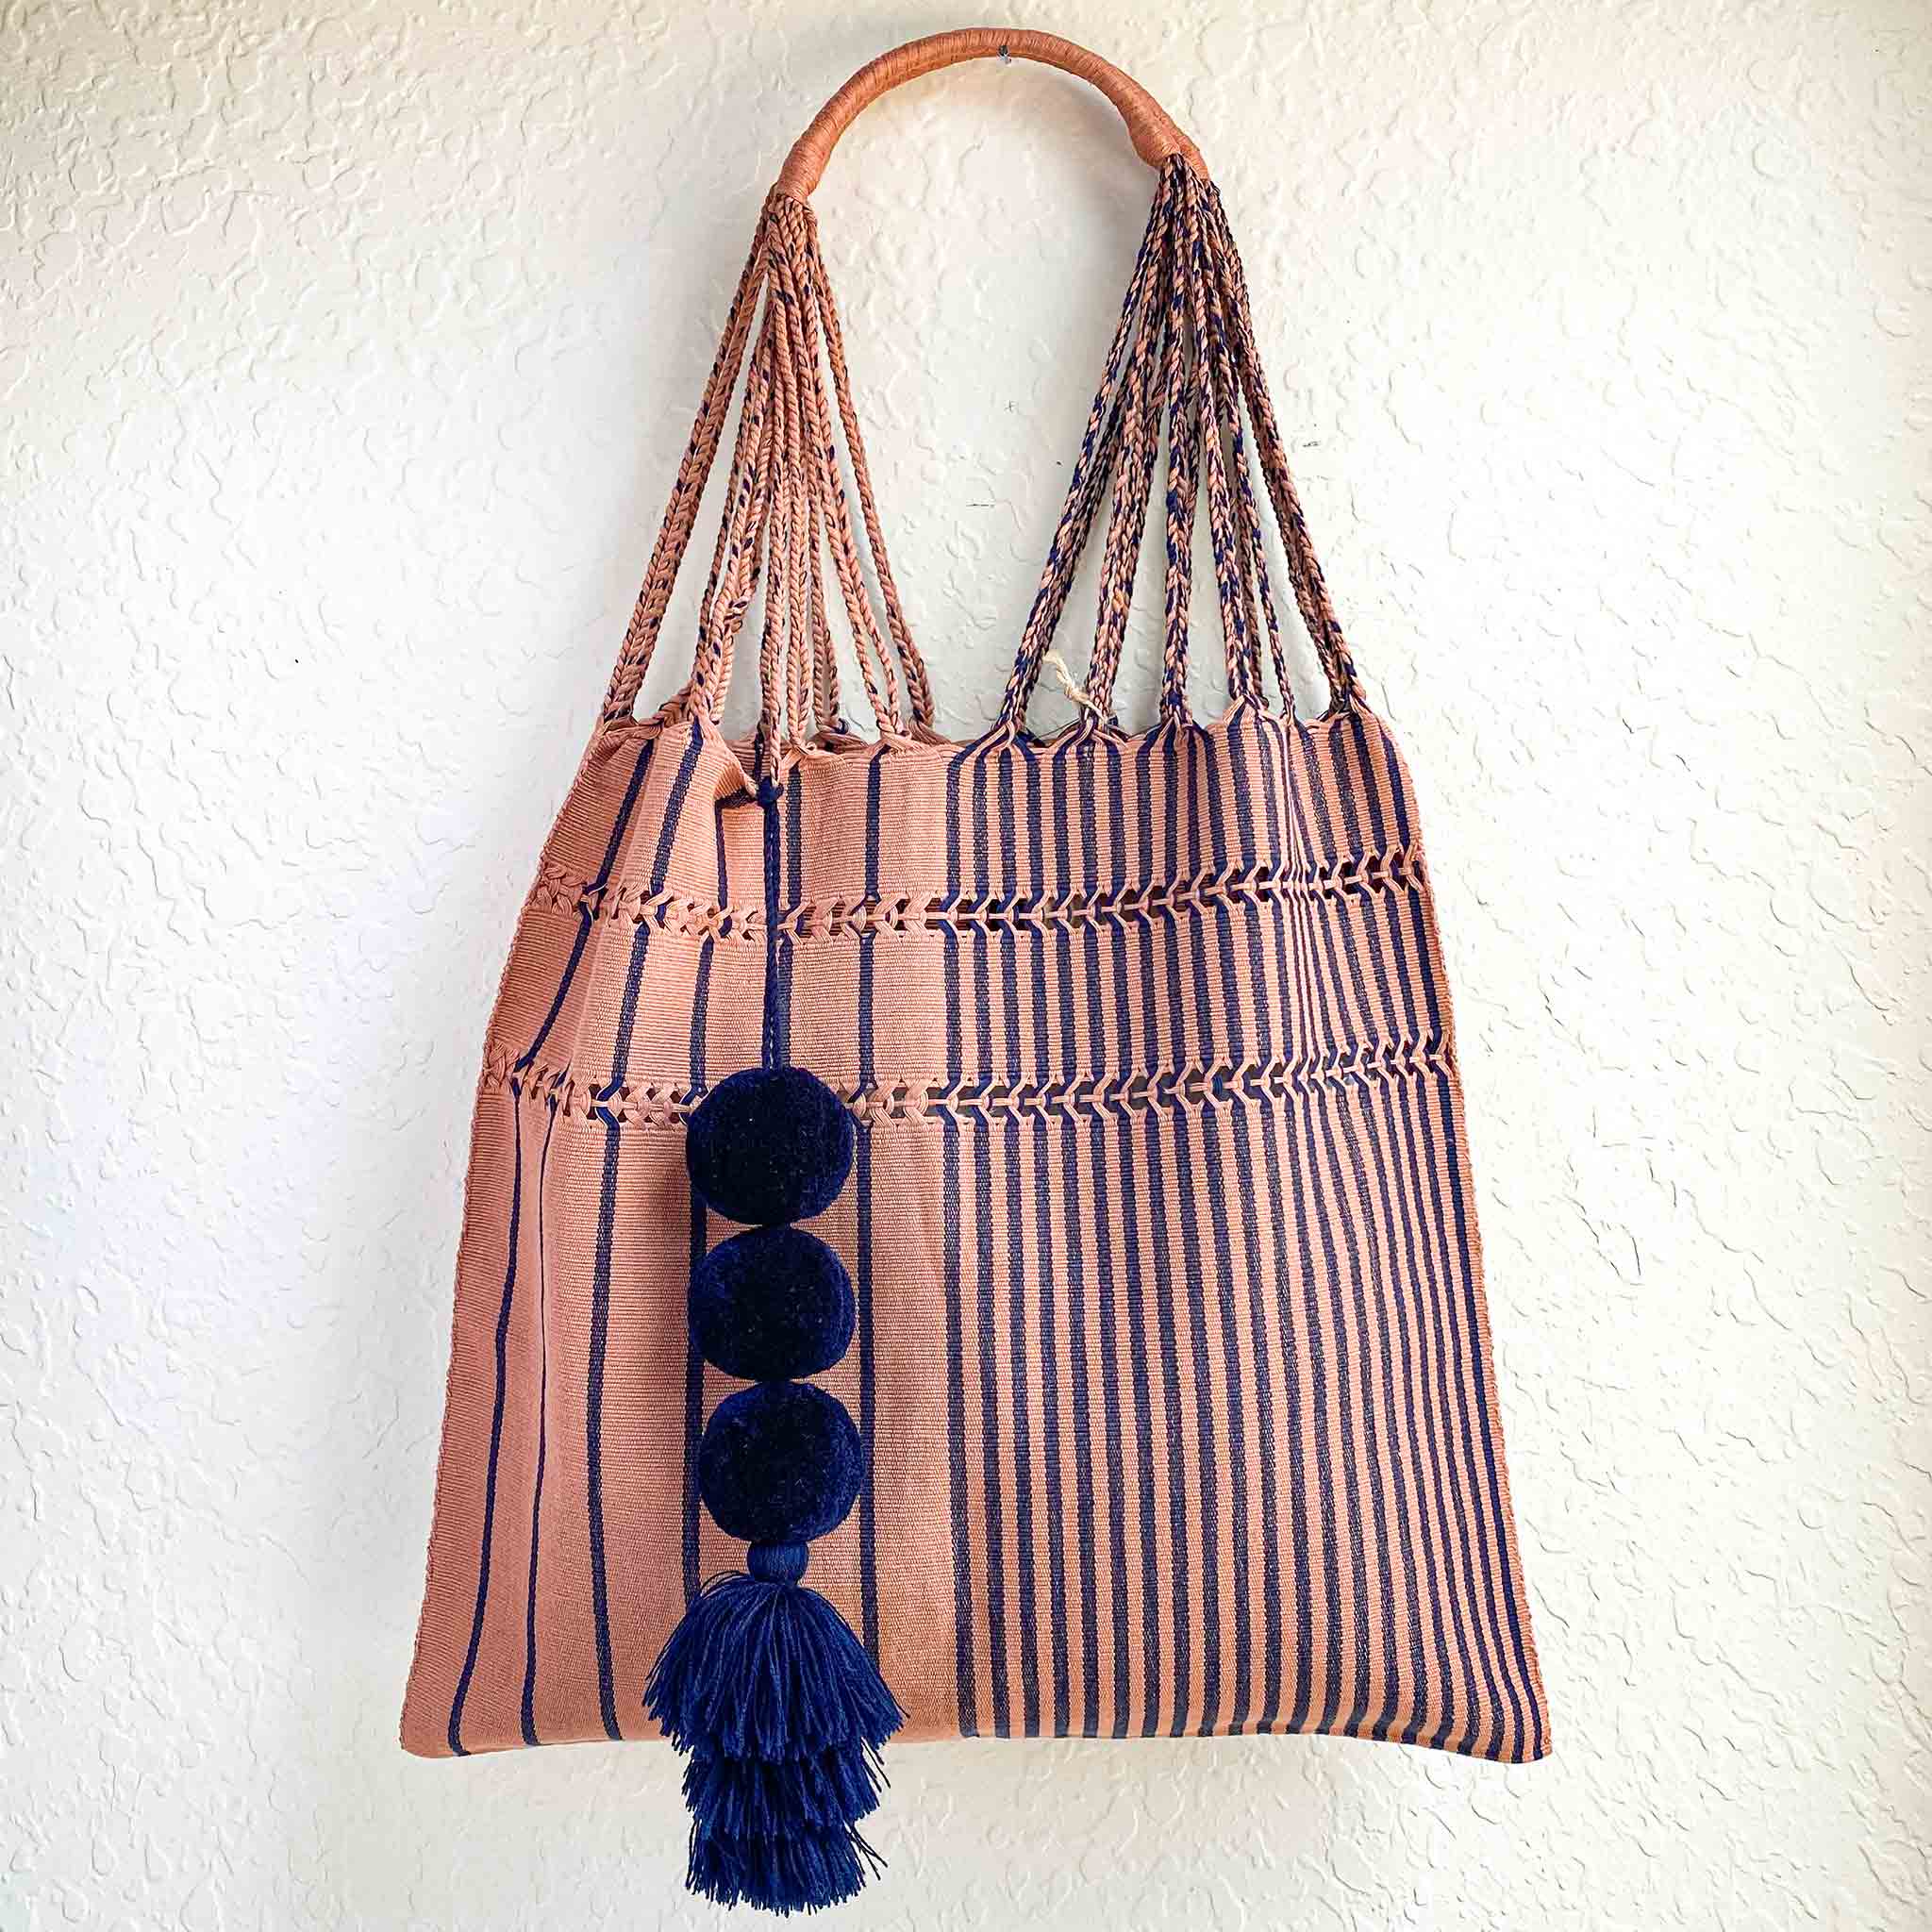 Handwoven Cotton Tote - Mauve in Navy Stripes